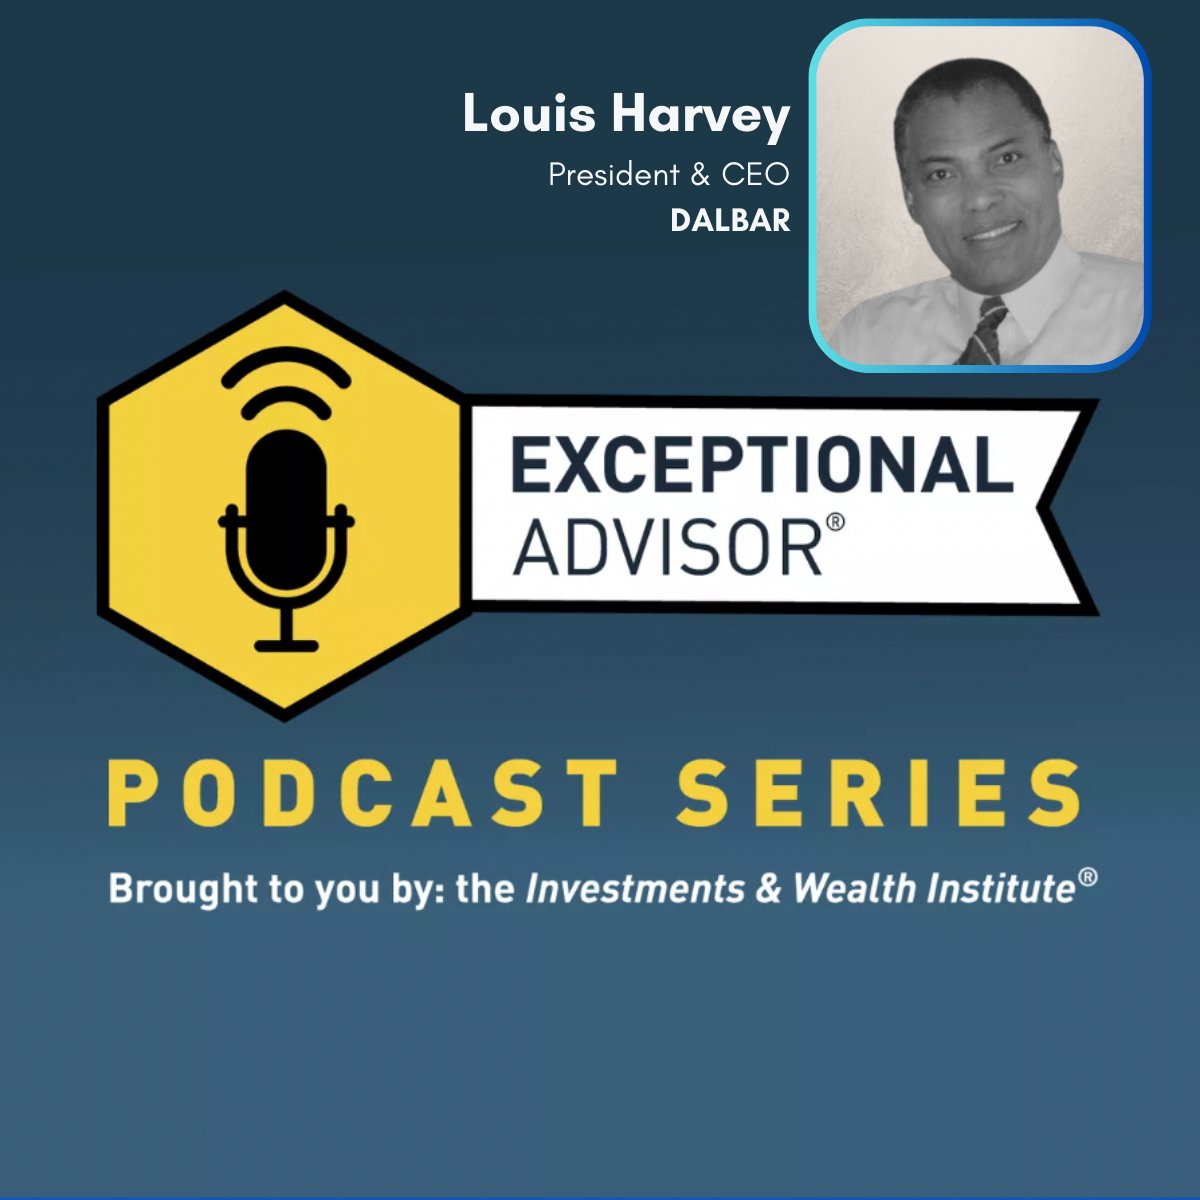 🎧Lou Harvey reflects on his pioneering investor behavior research with the QAIB report & his views on current industry trends & future outlook including AI as a guest on @iw_inst's podcast, The Exceptional Advisor. tinyurl.com/LouHarvey